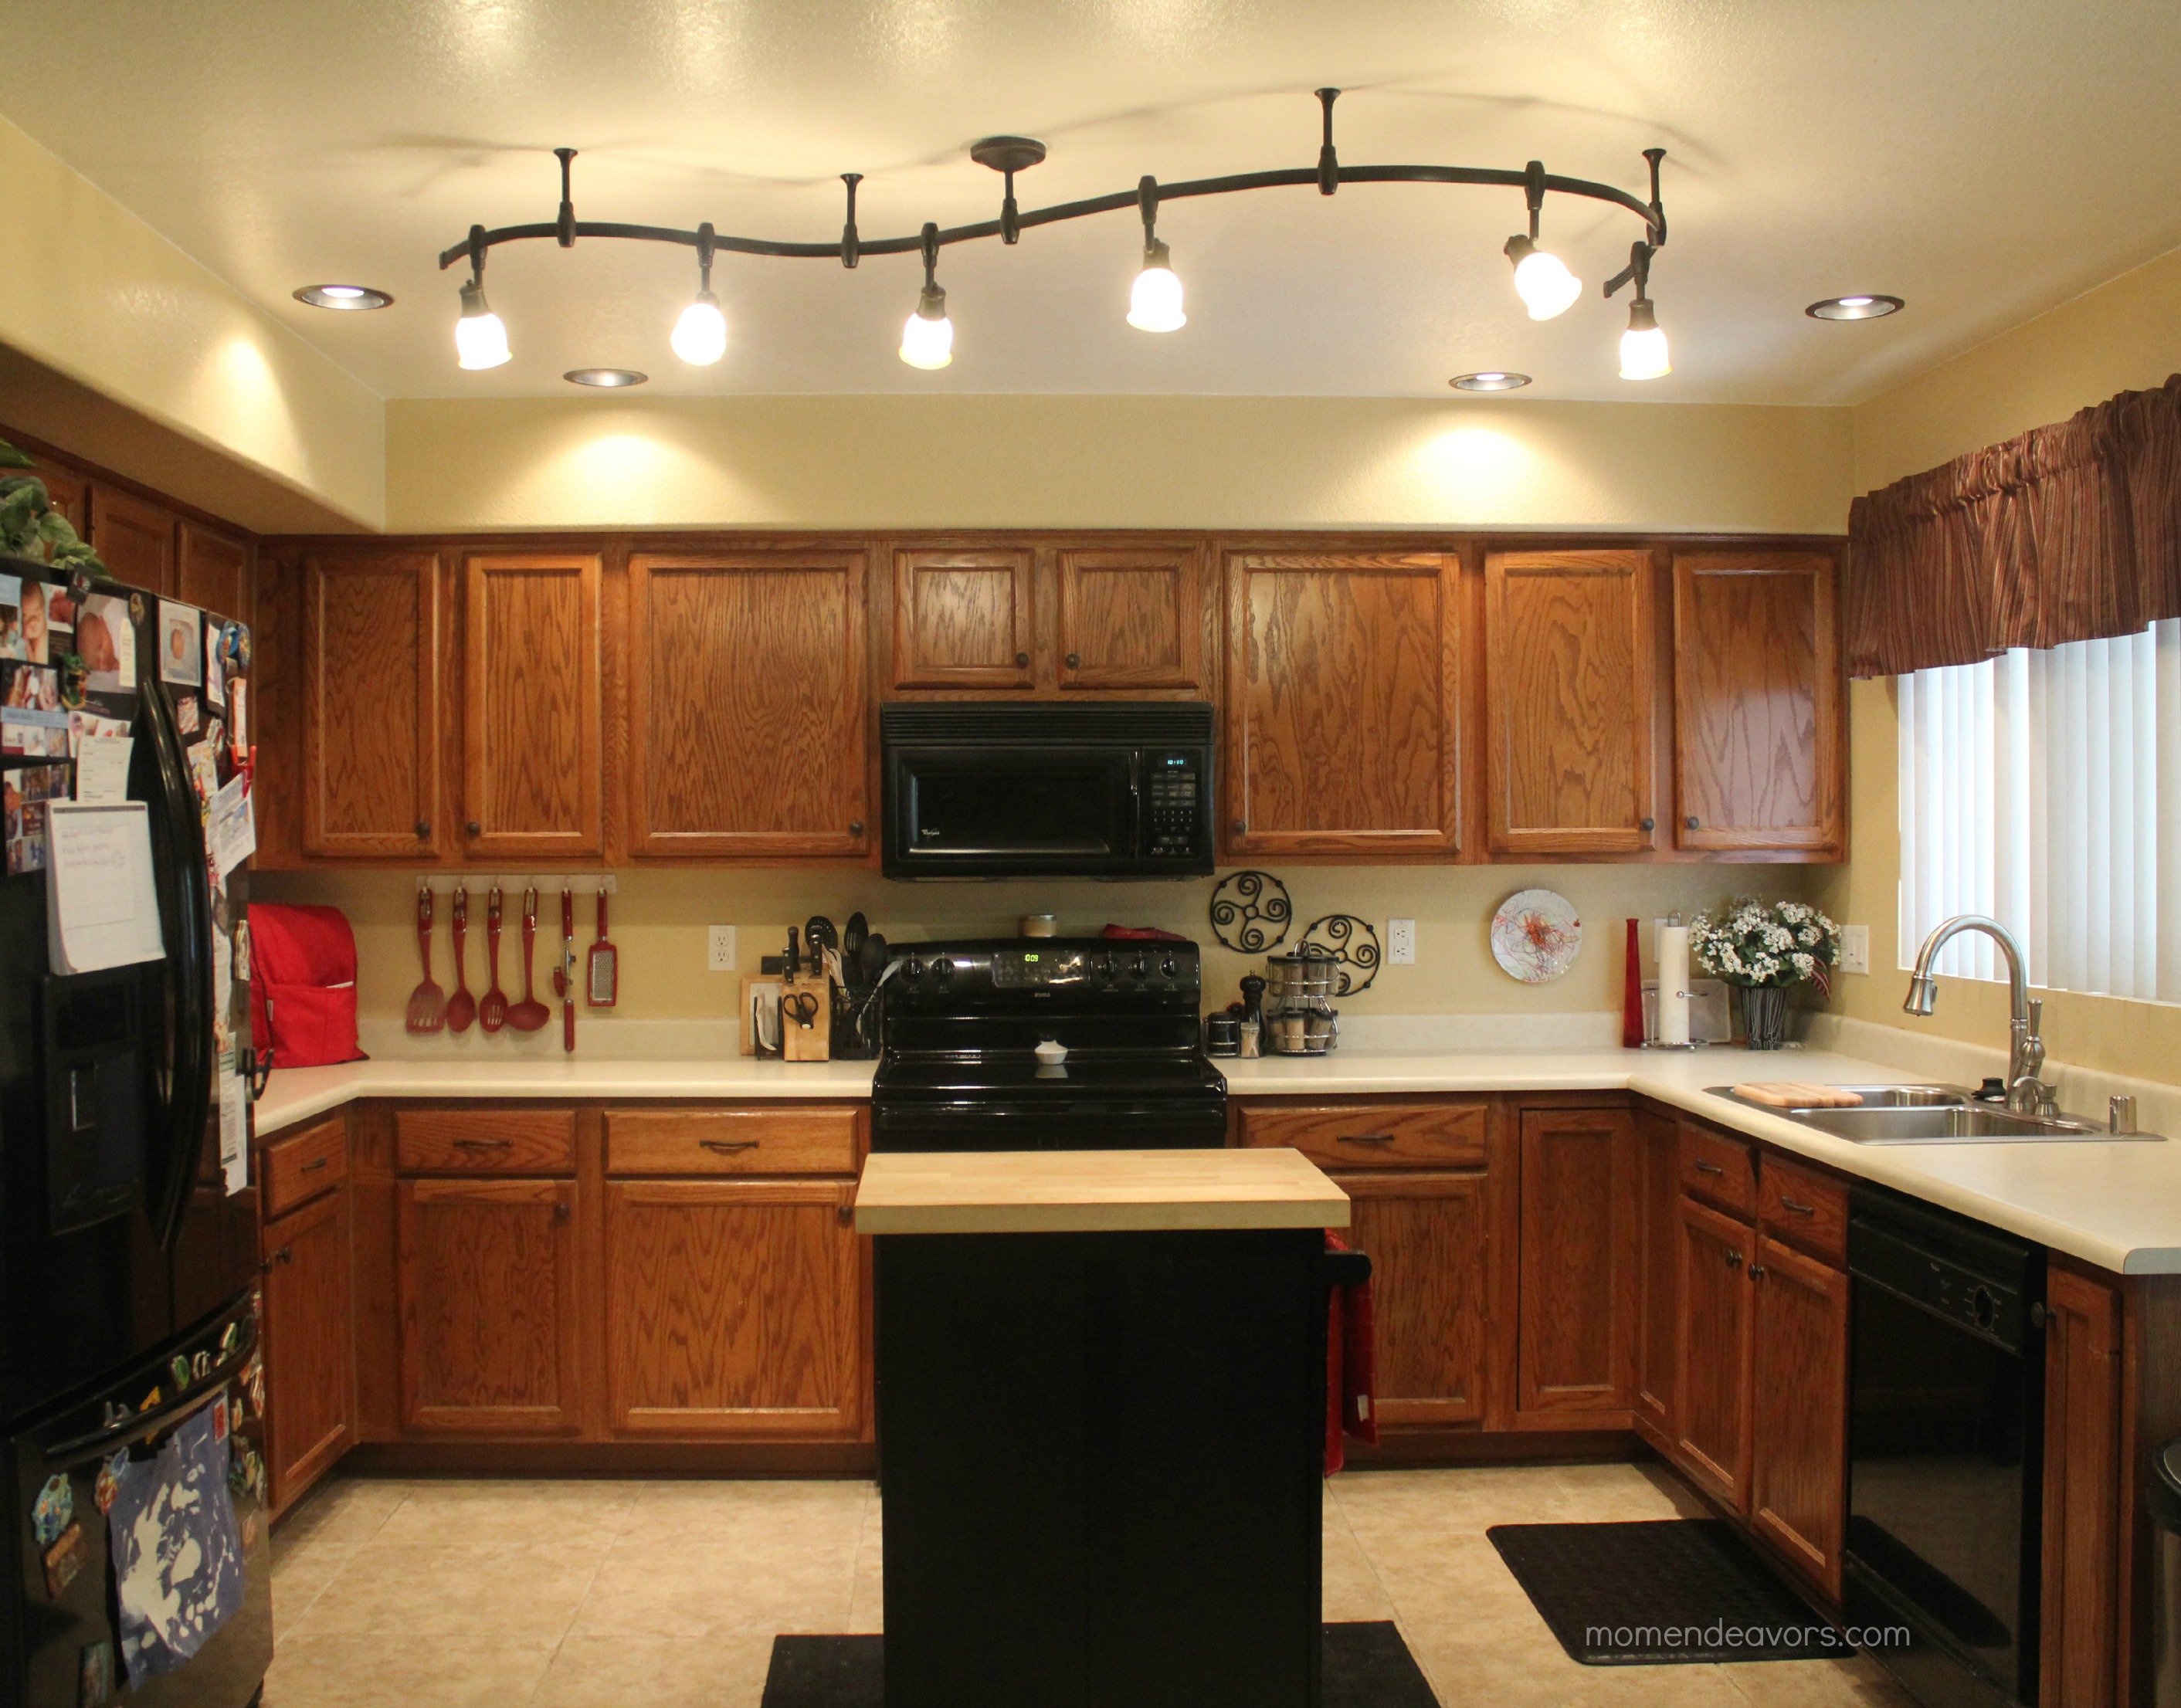 Mini Kitchen Remodel – New lighting makes a WORLD of difference!